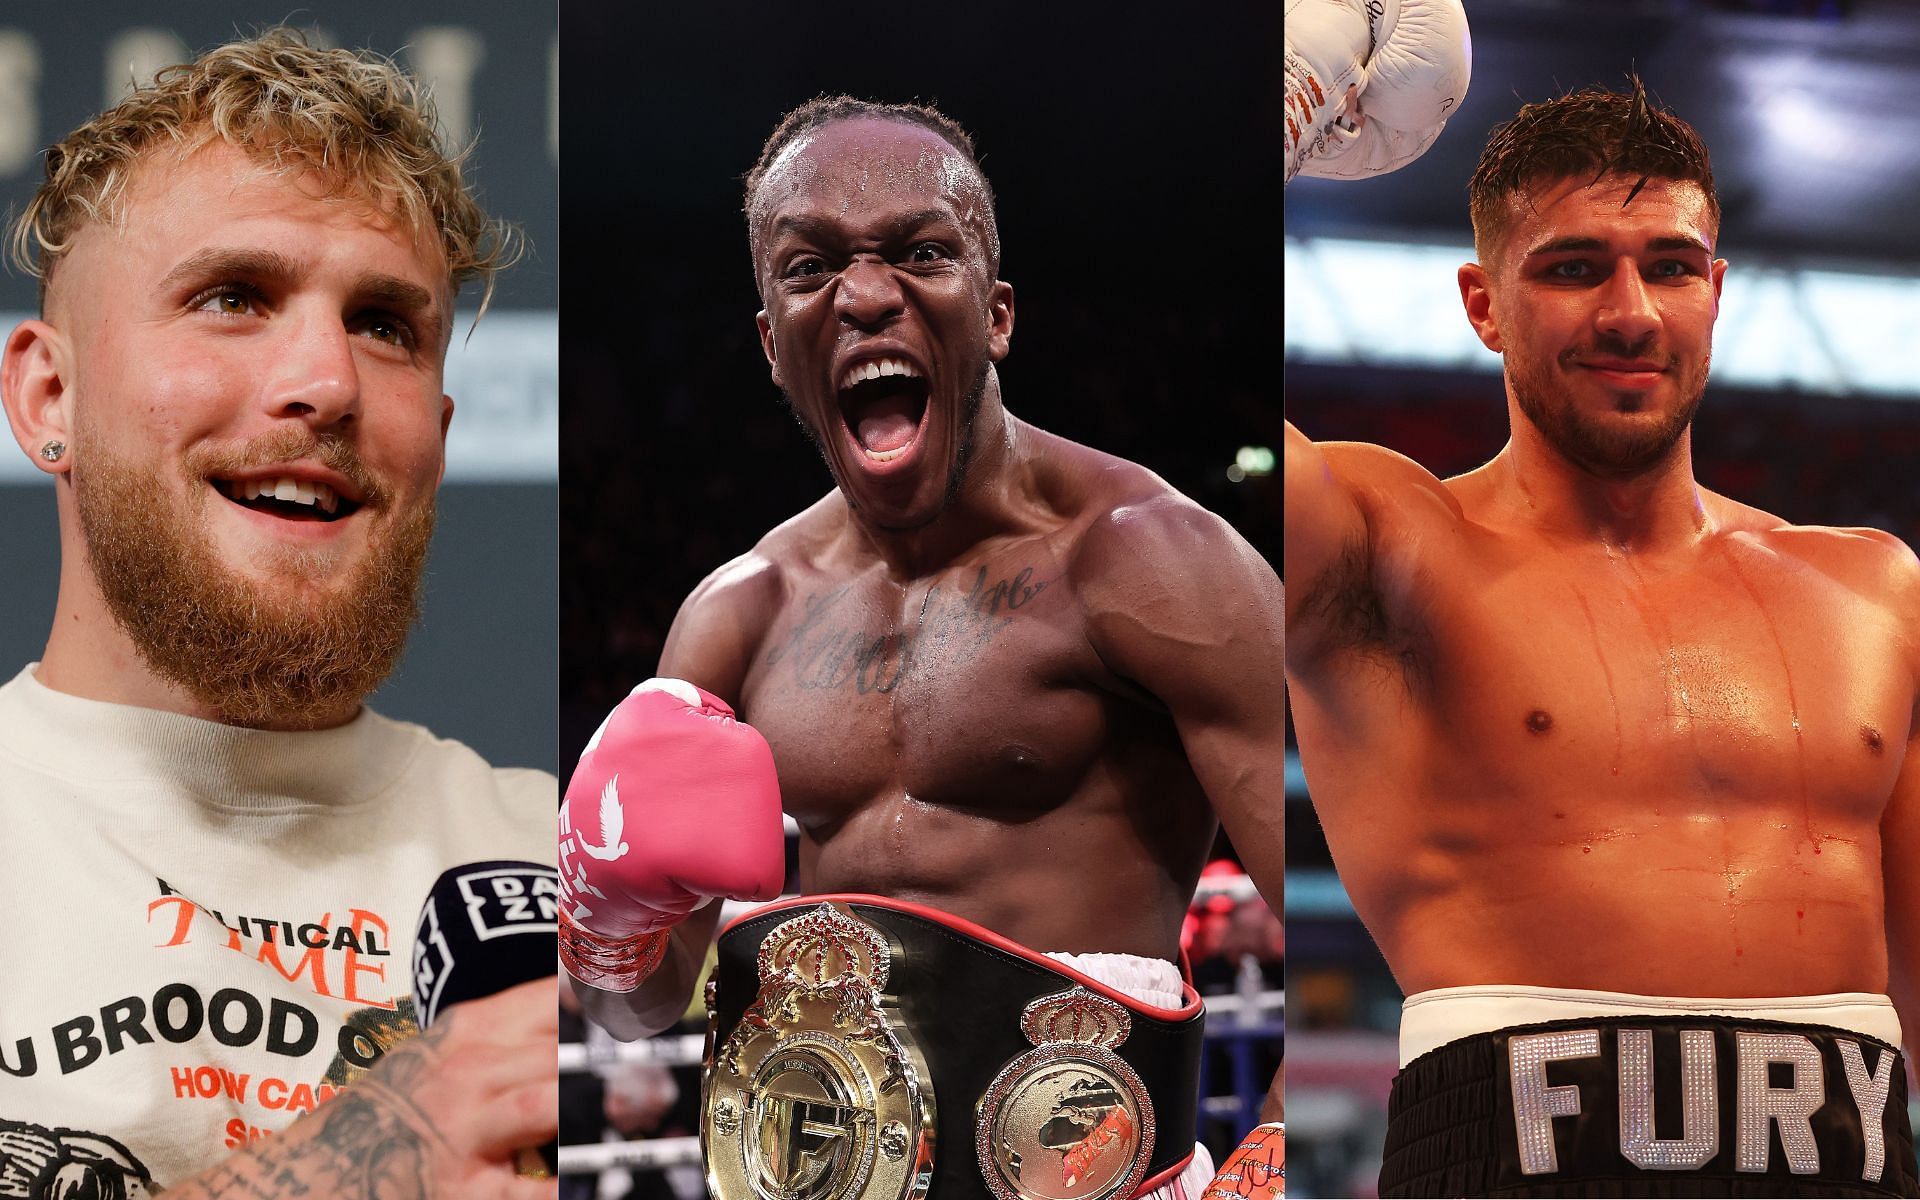 Jake Paul (left), KSI (center), and Tommy Fury (right) (Image credits Getty Images)